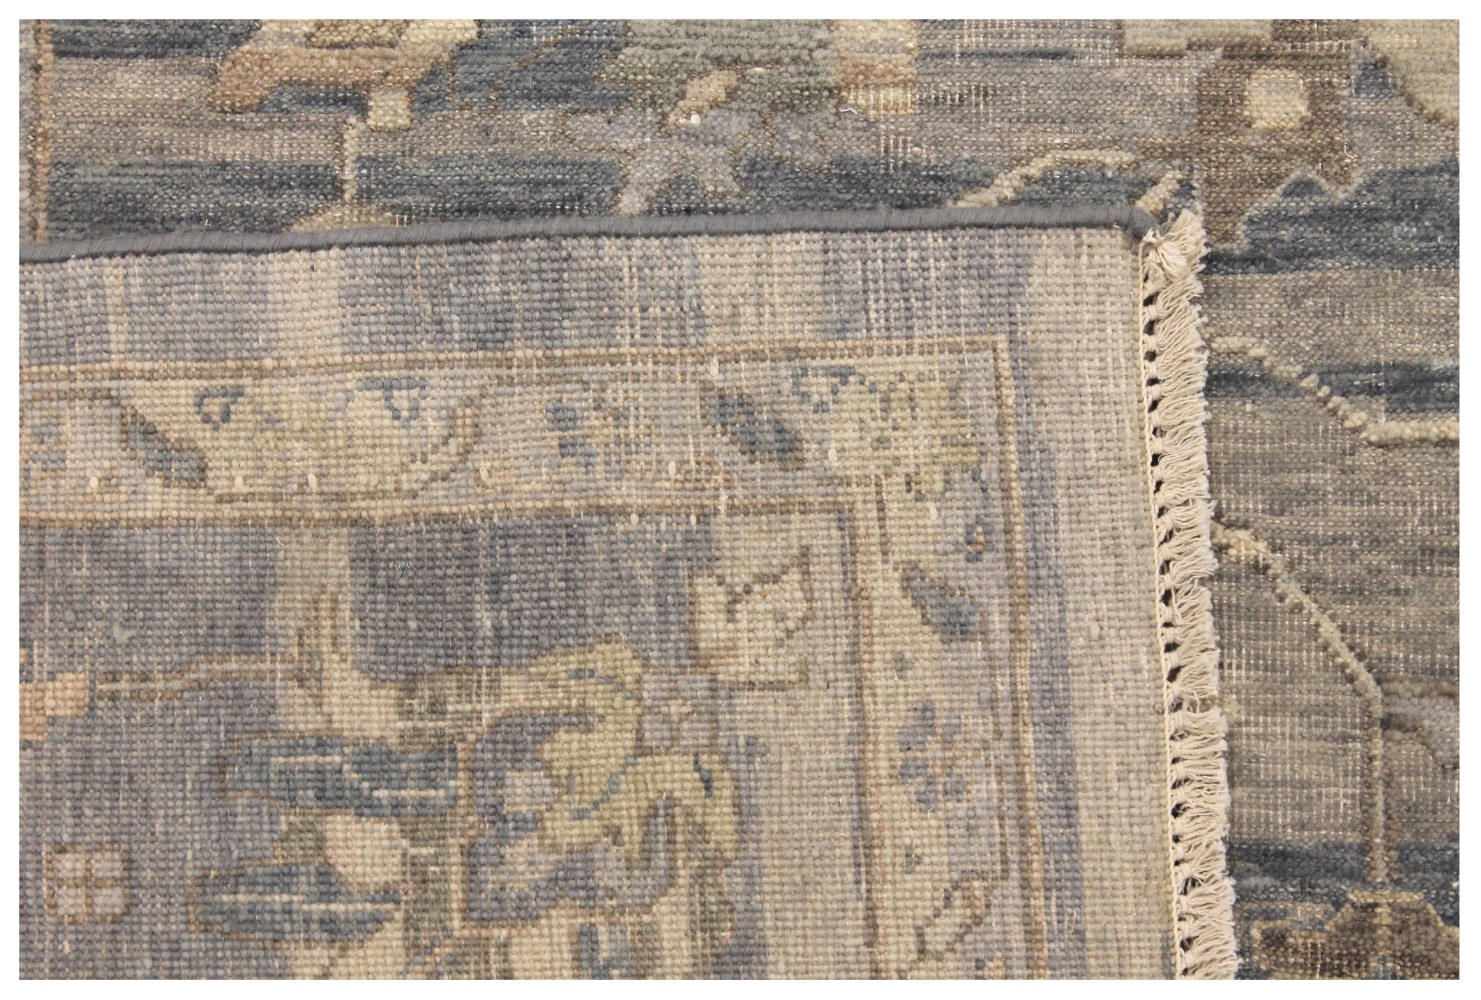 9x12 Aryana & Antique Revivals Hand Knotted Wool Area Rug - MR028543